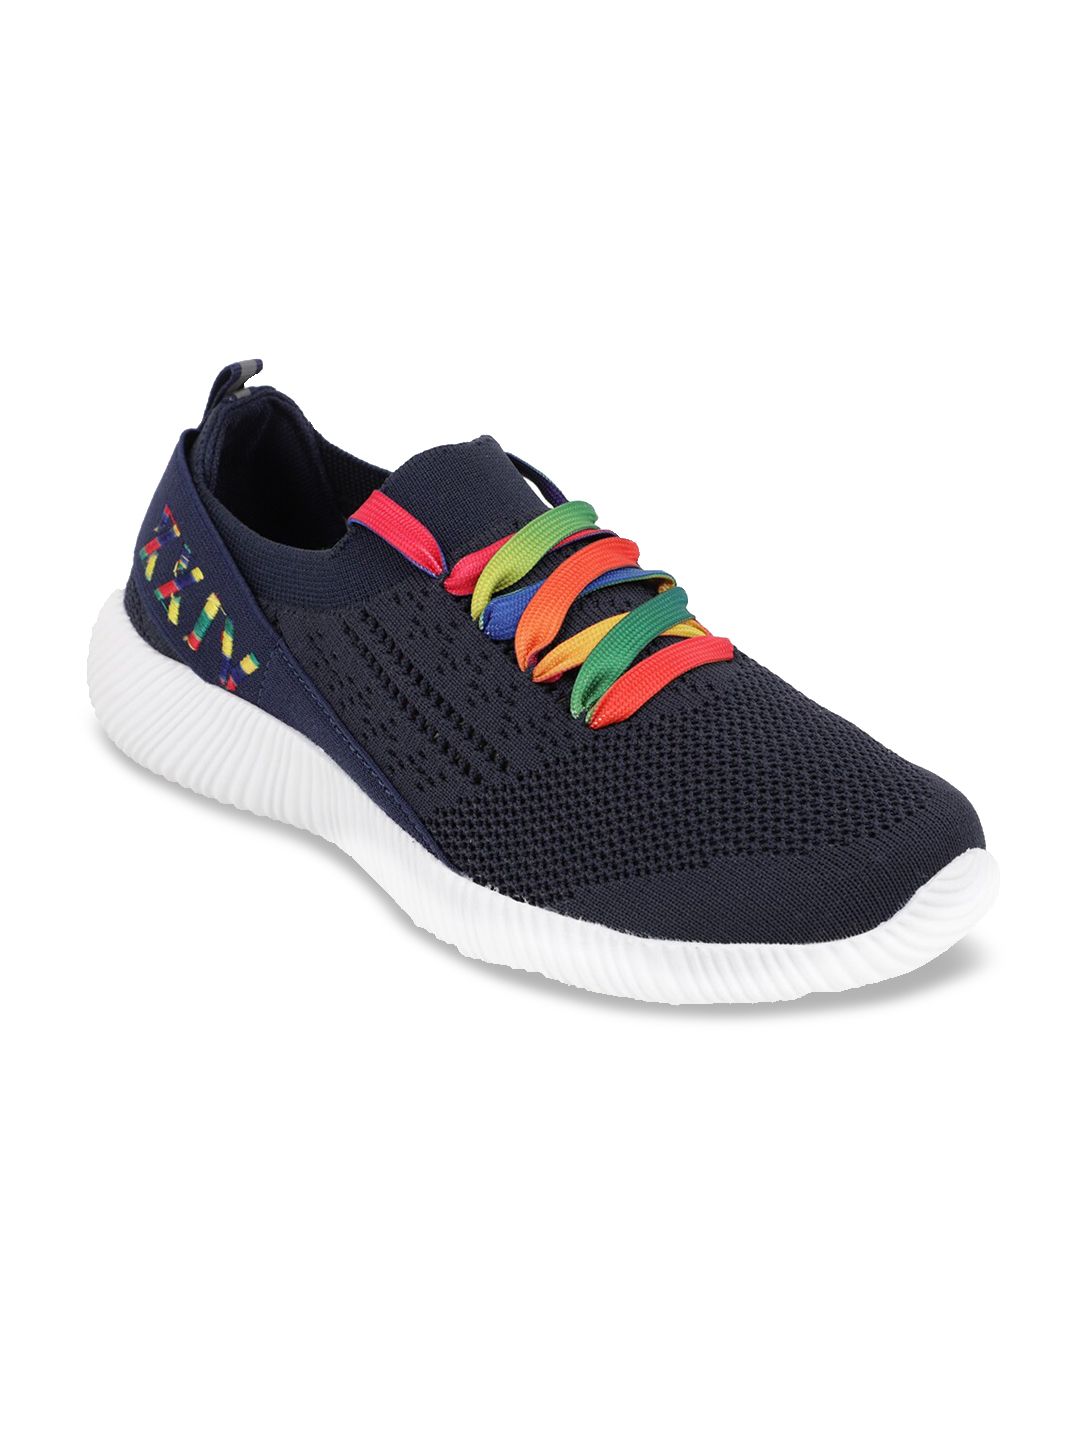 KazarMax Women Navy Blue Mesh Training or Gym Shoes Price in India